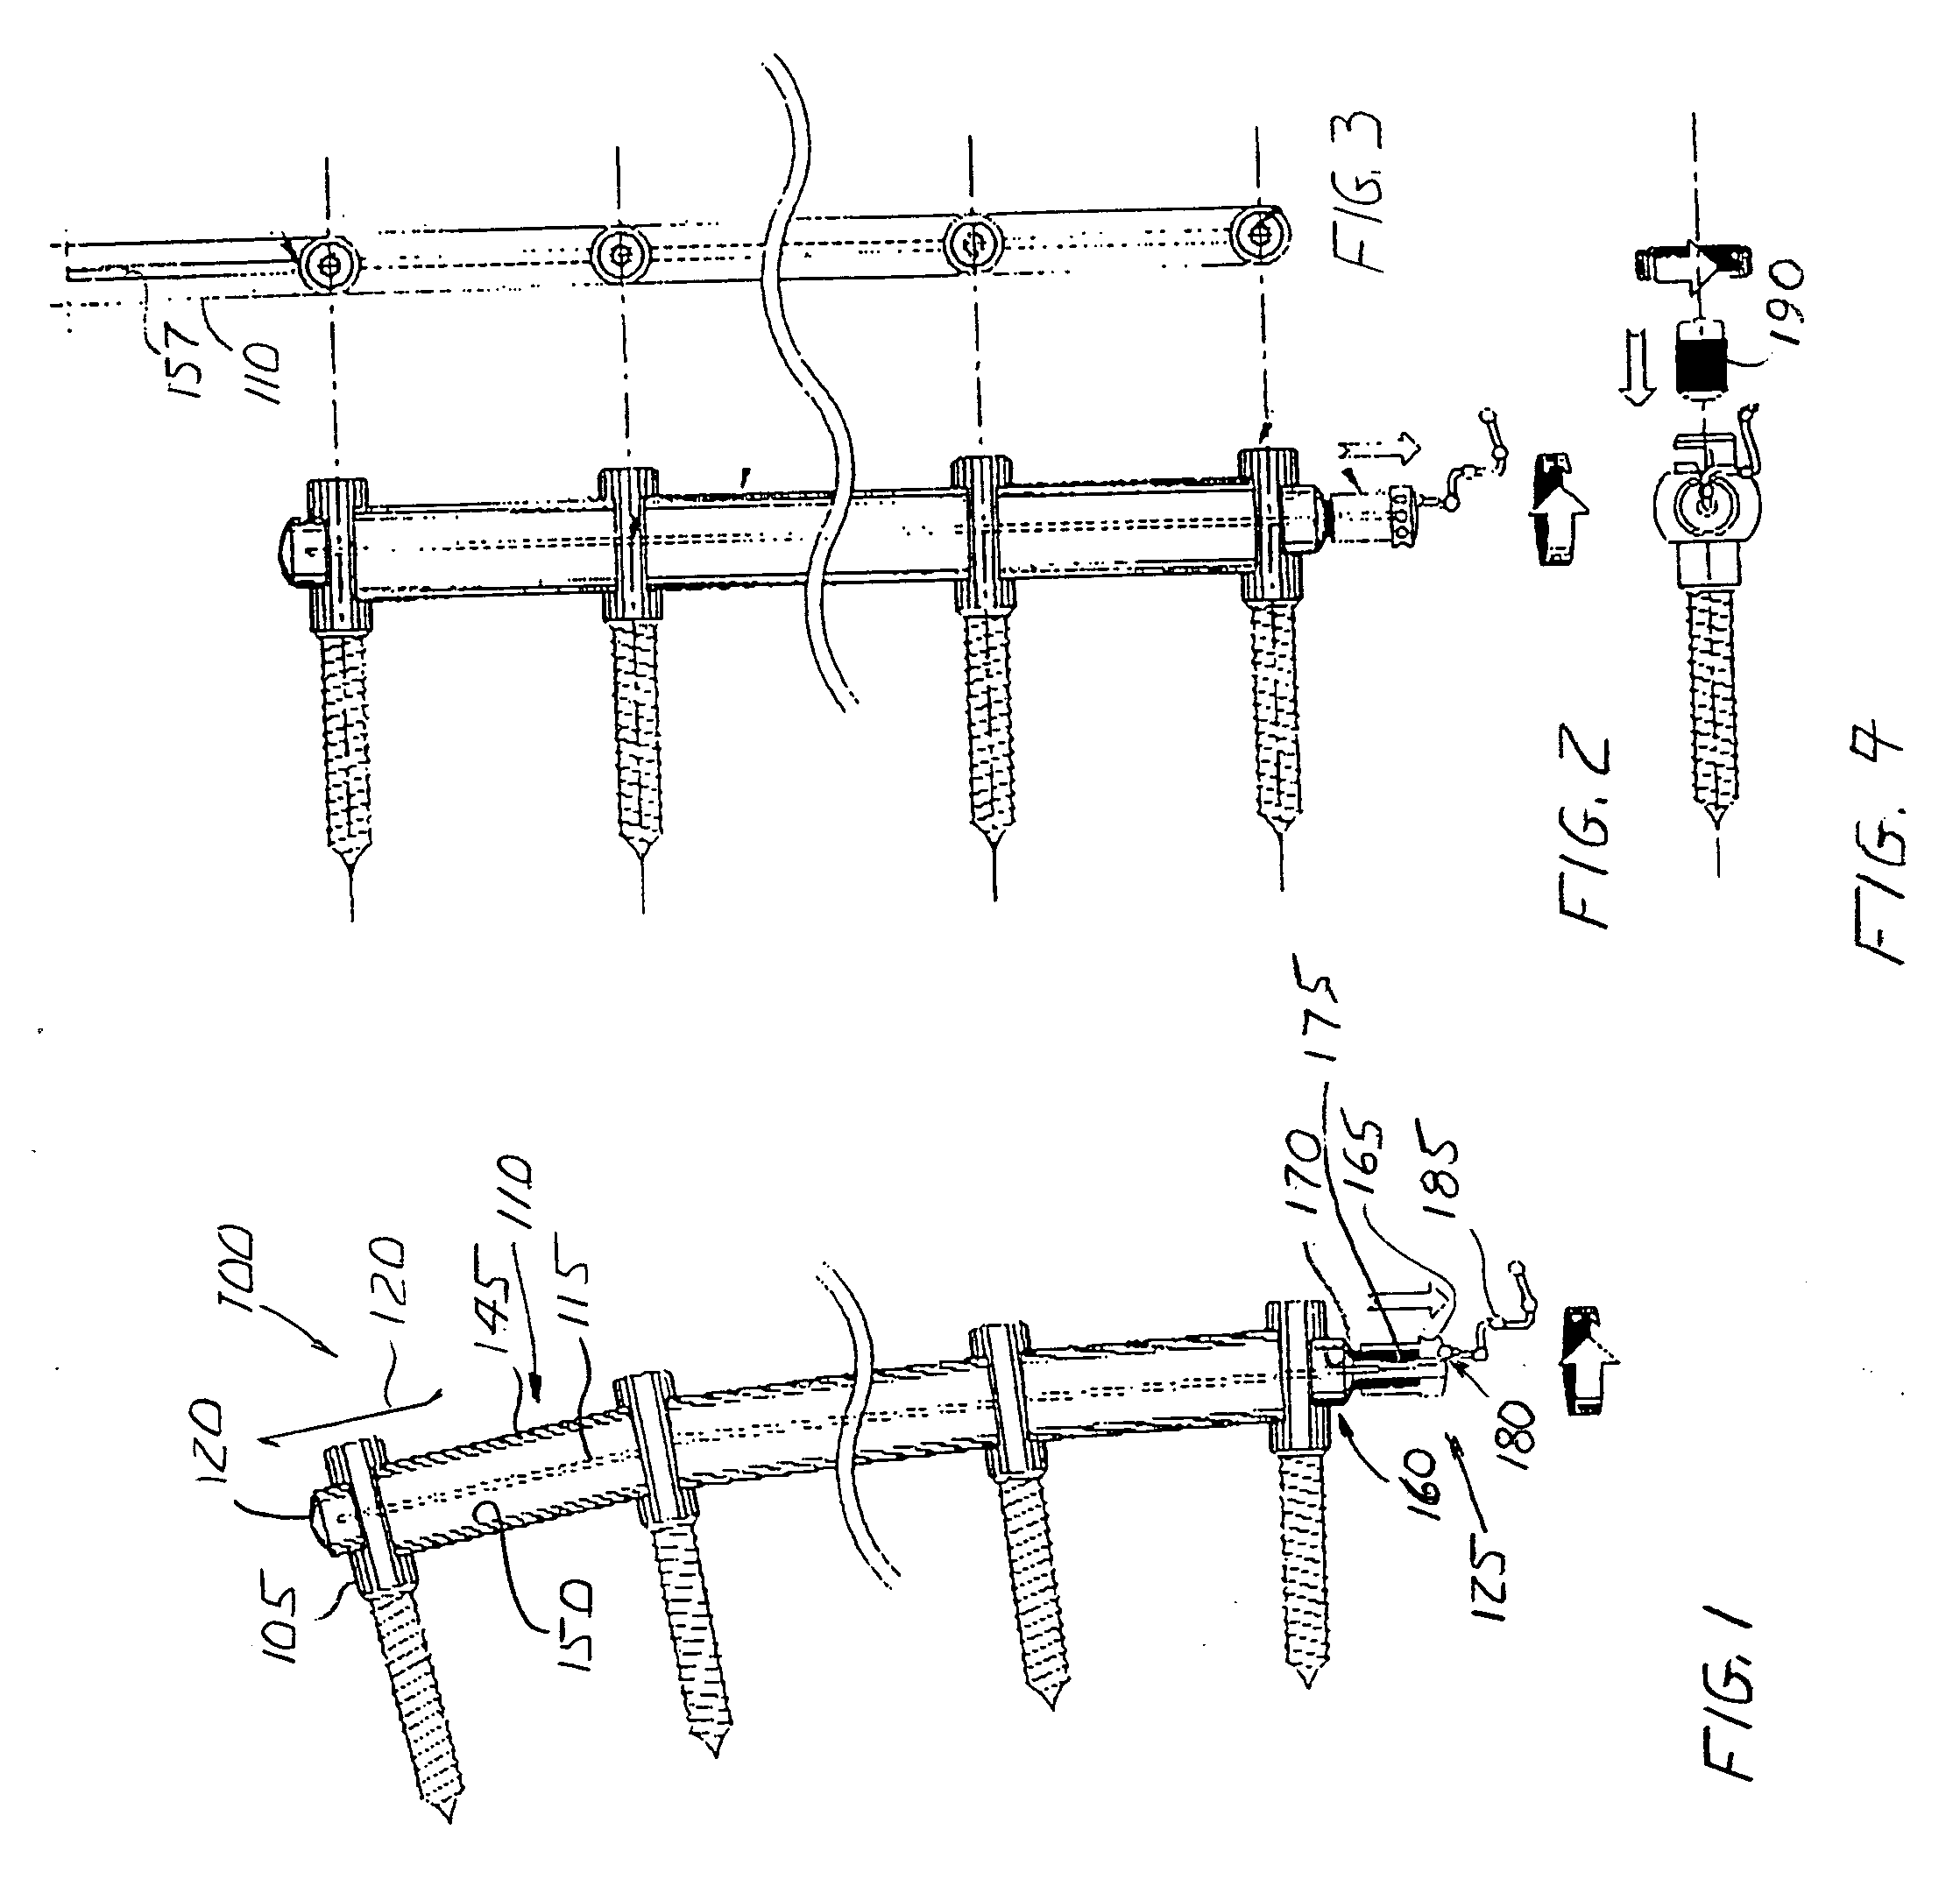 Apparatus for and method of aligning a spine